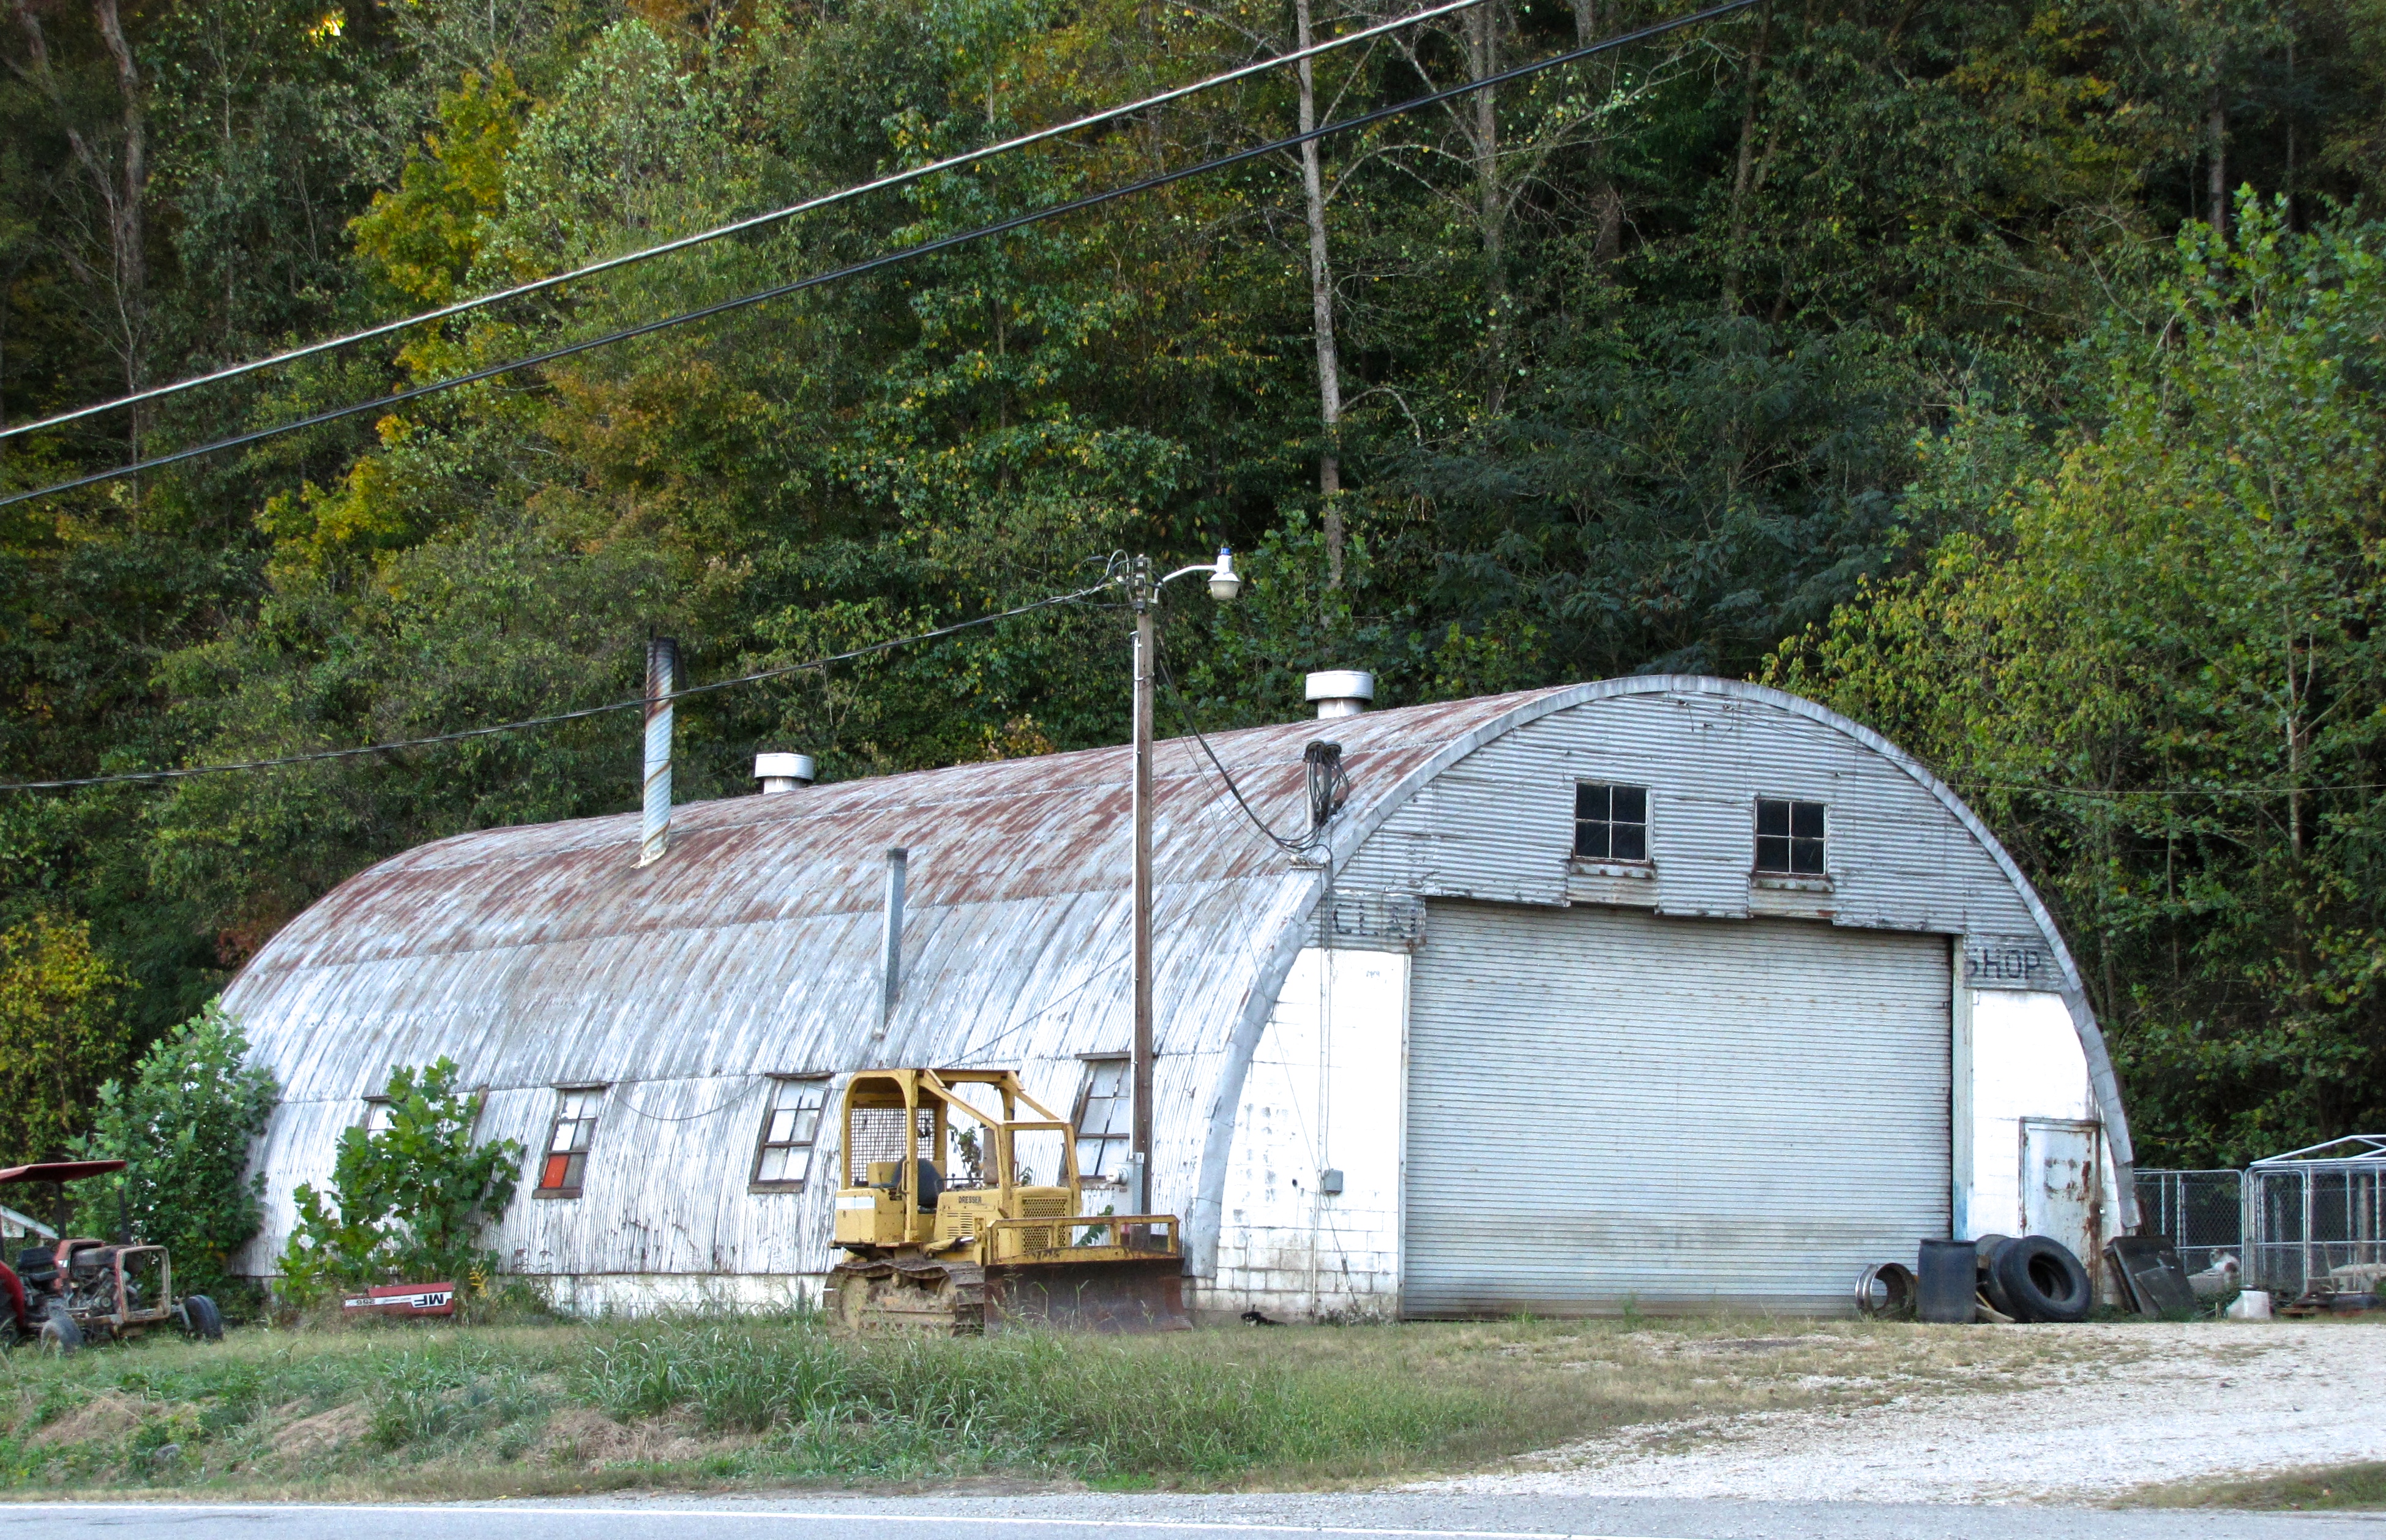 quonset hut in Terms Of Service, KY